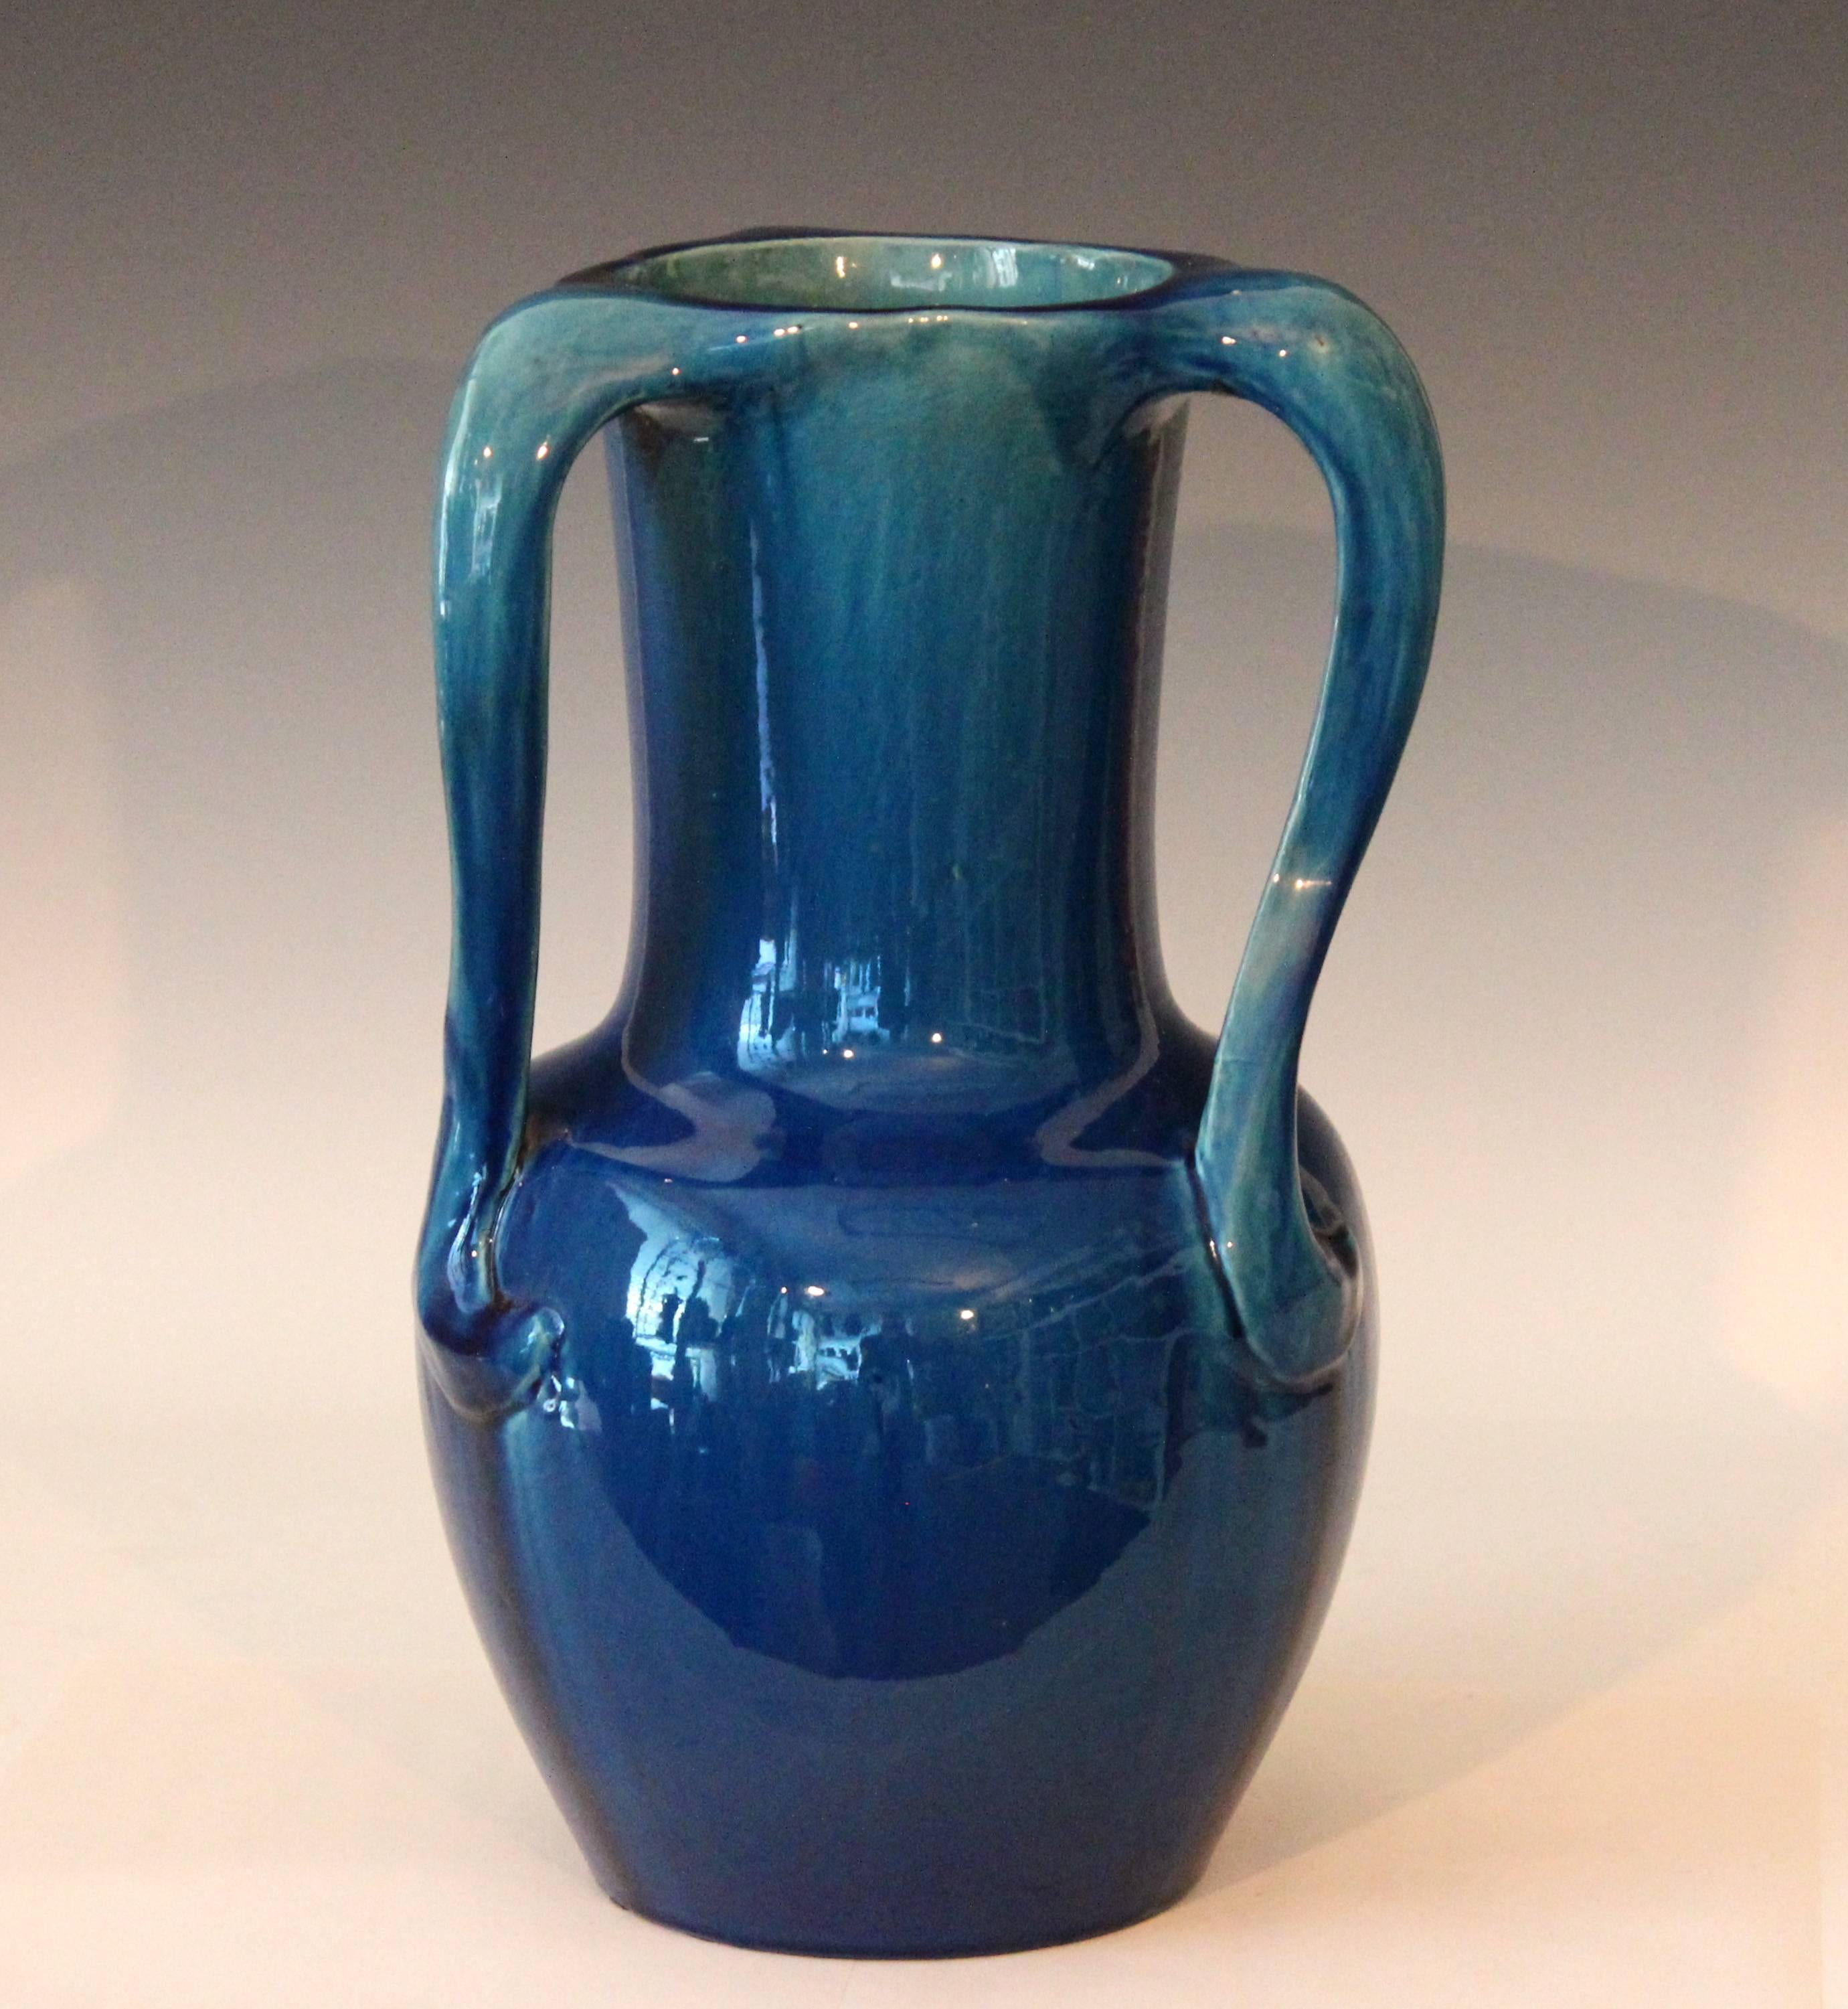 Large Kyoto pottery Art Nouveau vase with lyrical S handles joining the rim to the body and finished in rich blue monochrome glaze with fine crackle, circa 1910. 14 1/2